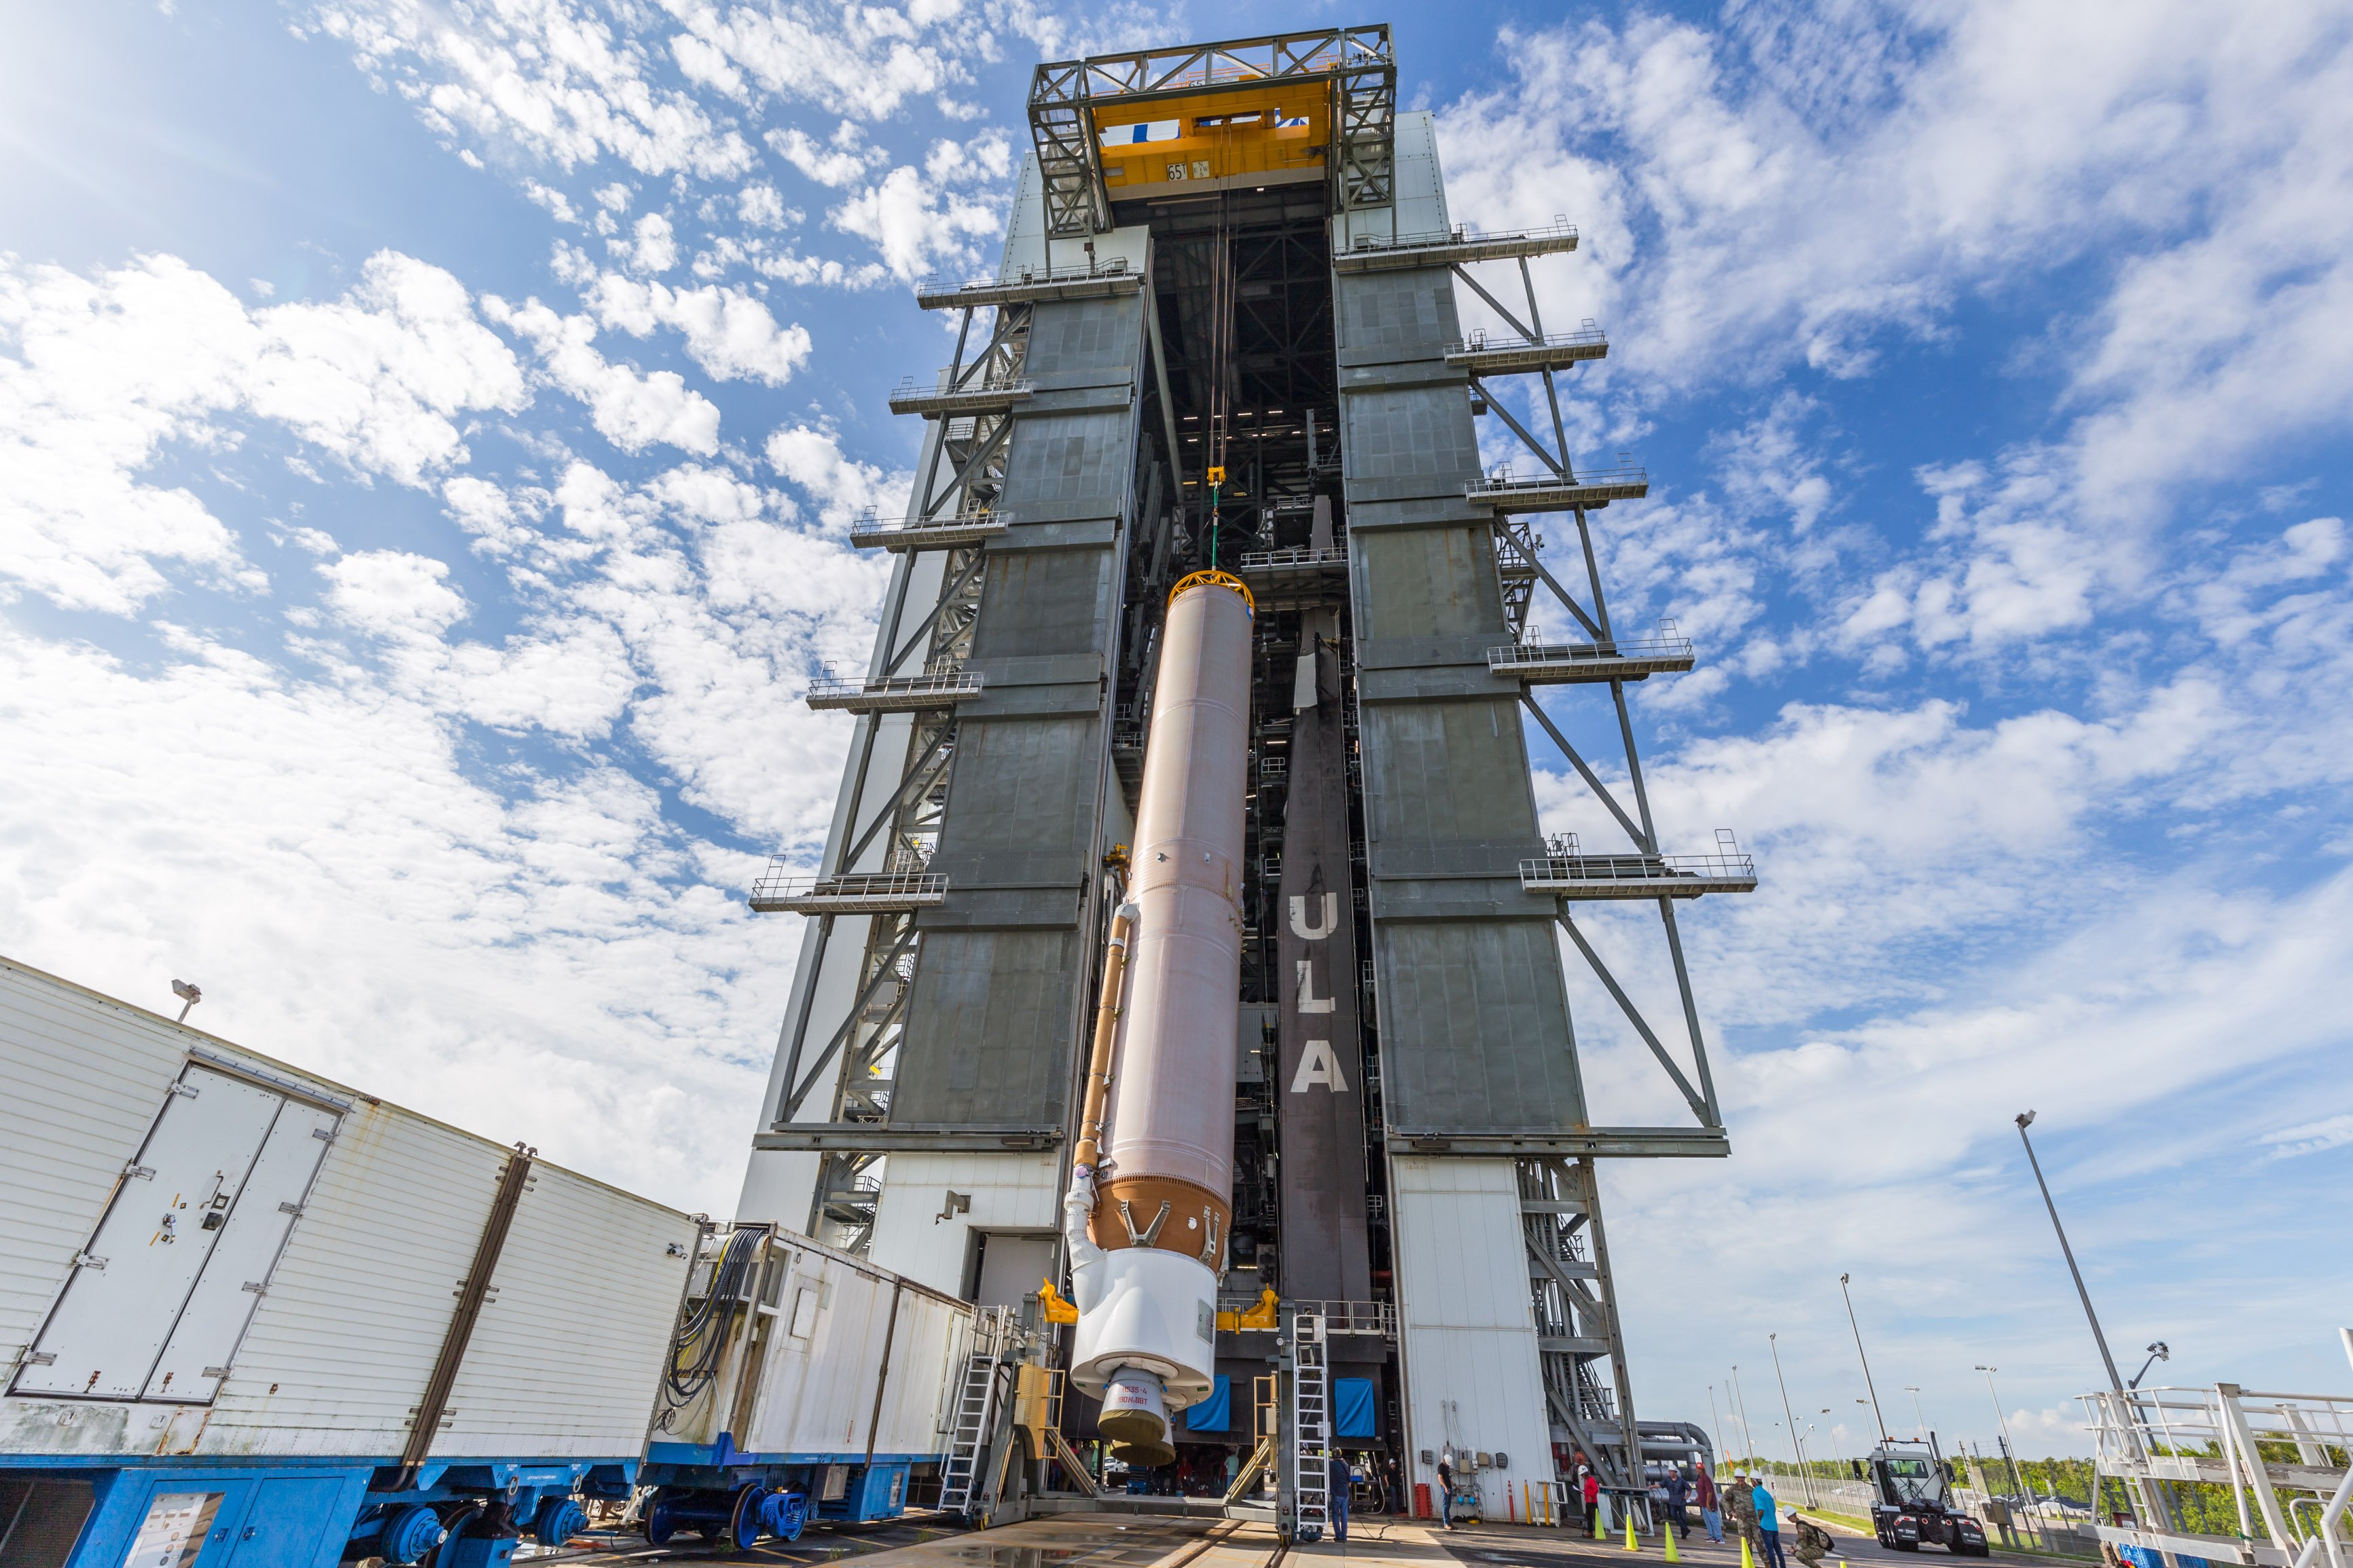 The. Atlas V first stage goes vertical for the SES mission. Photo by United Launch Alliance